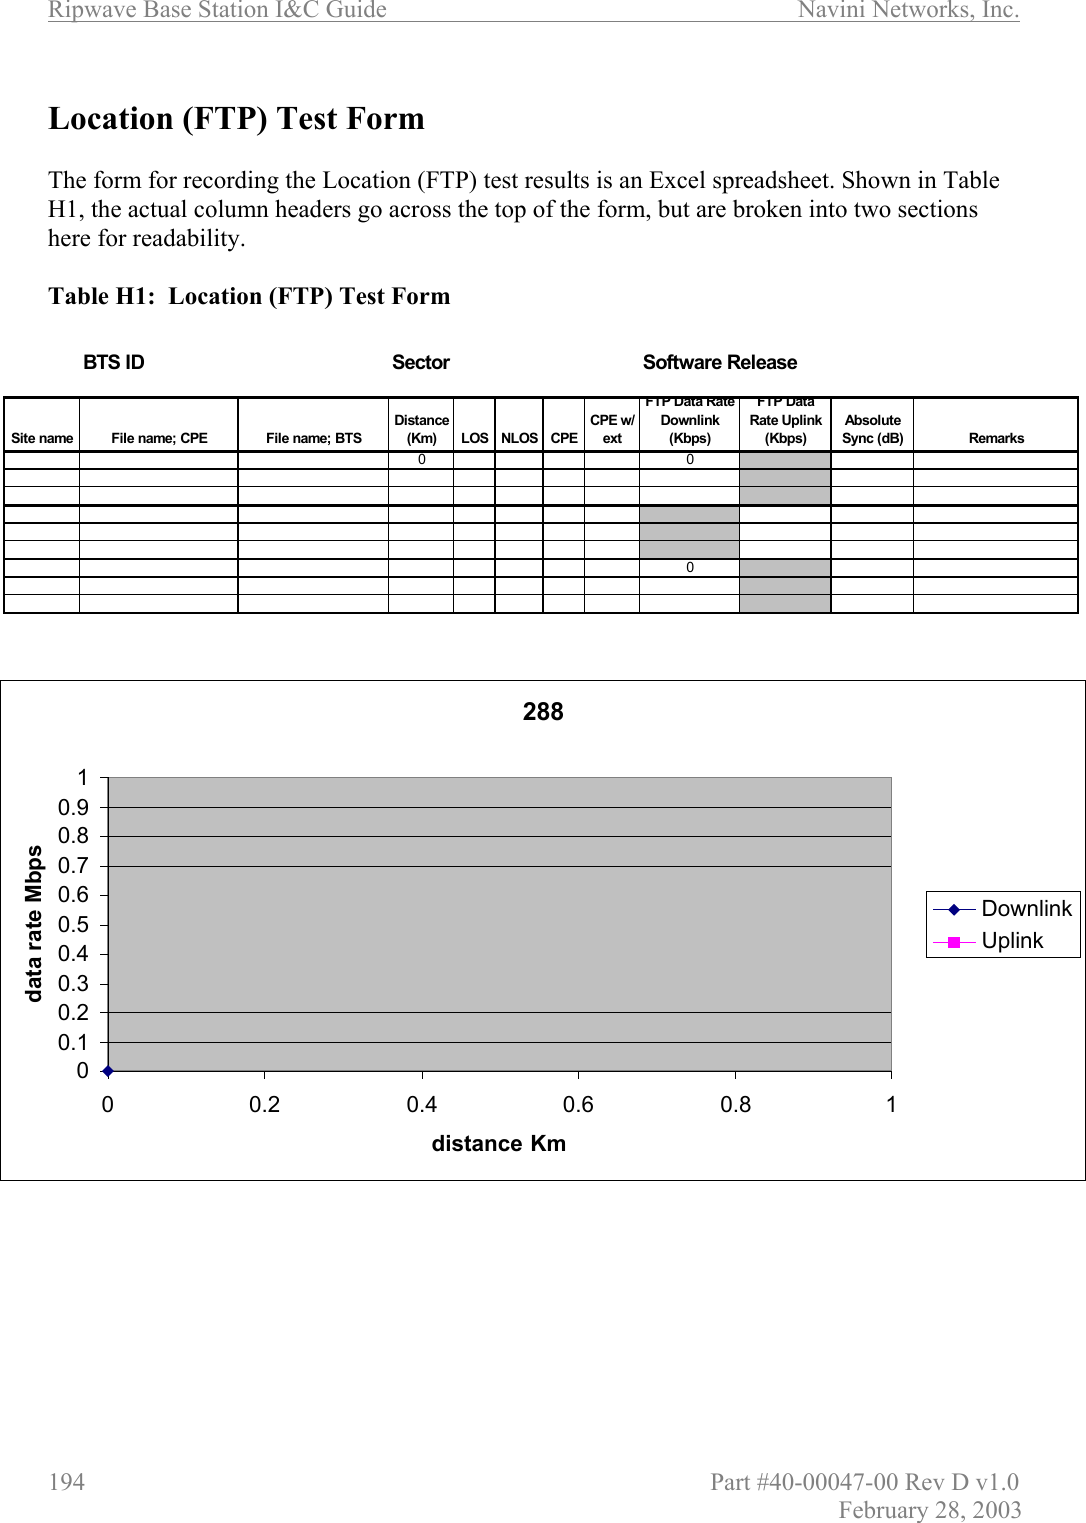 Ripwave Base Station I&amp;C Guide                      Navini Networks, Inc. 194                          Part #40-00047-00 Rev D v1.0 February 28, 2003  Location (FTP) Test Form  The form for recording the Location (FTP) test results is an Excel spreadsheet. Shown in Table H1, the actual column headers go across the top of the form, but are broken into two sections here for readability.  Table H1:  Location (FTP) Test Form     BTS ID Sector Software ReleaseSite name File name; CPE File name; BTSDistance (Km) LOS NLOS CPECPE w/ extFTP Data Rate Downlink (Kbps)FTP Data Rate Uplink (Kbps)Absolute Sync (dB) Remarks00028800.10.20.30.40.50.60.70.80.910 0.2 0.4 0.6 0.8 1distance Kmdata rate MbpsDownlinkUplink